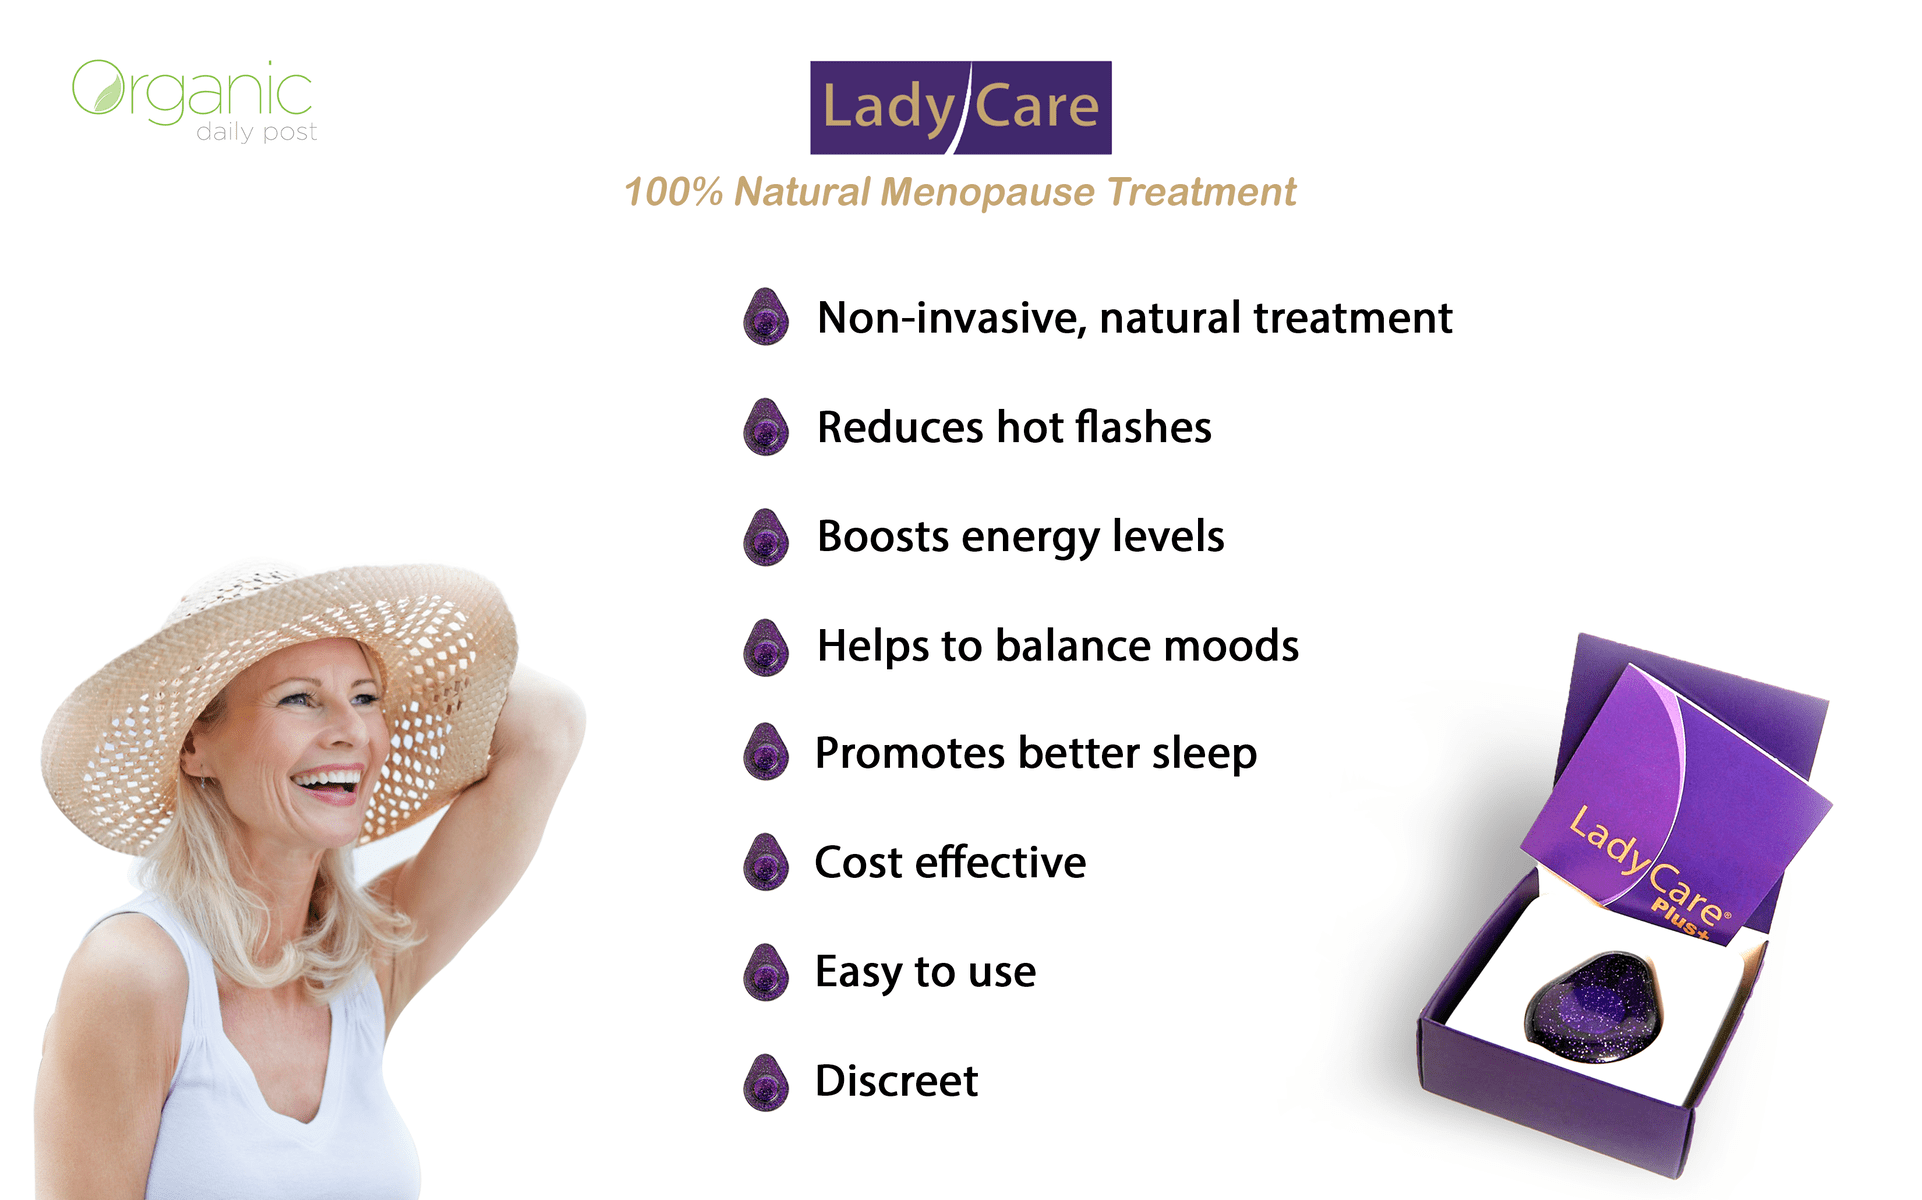 Ladycare Review